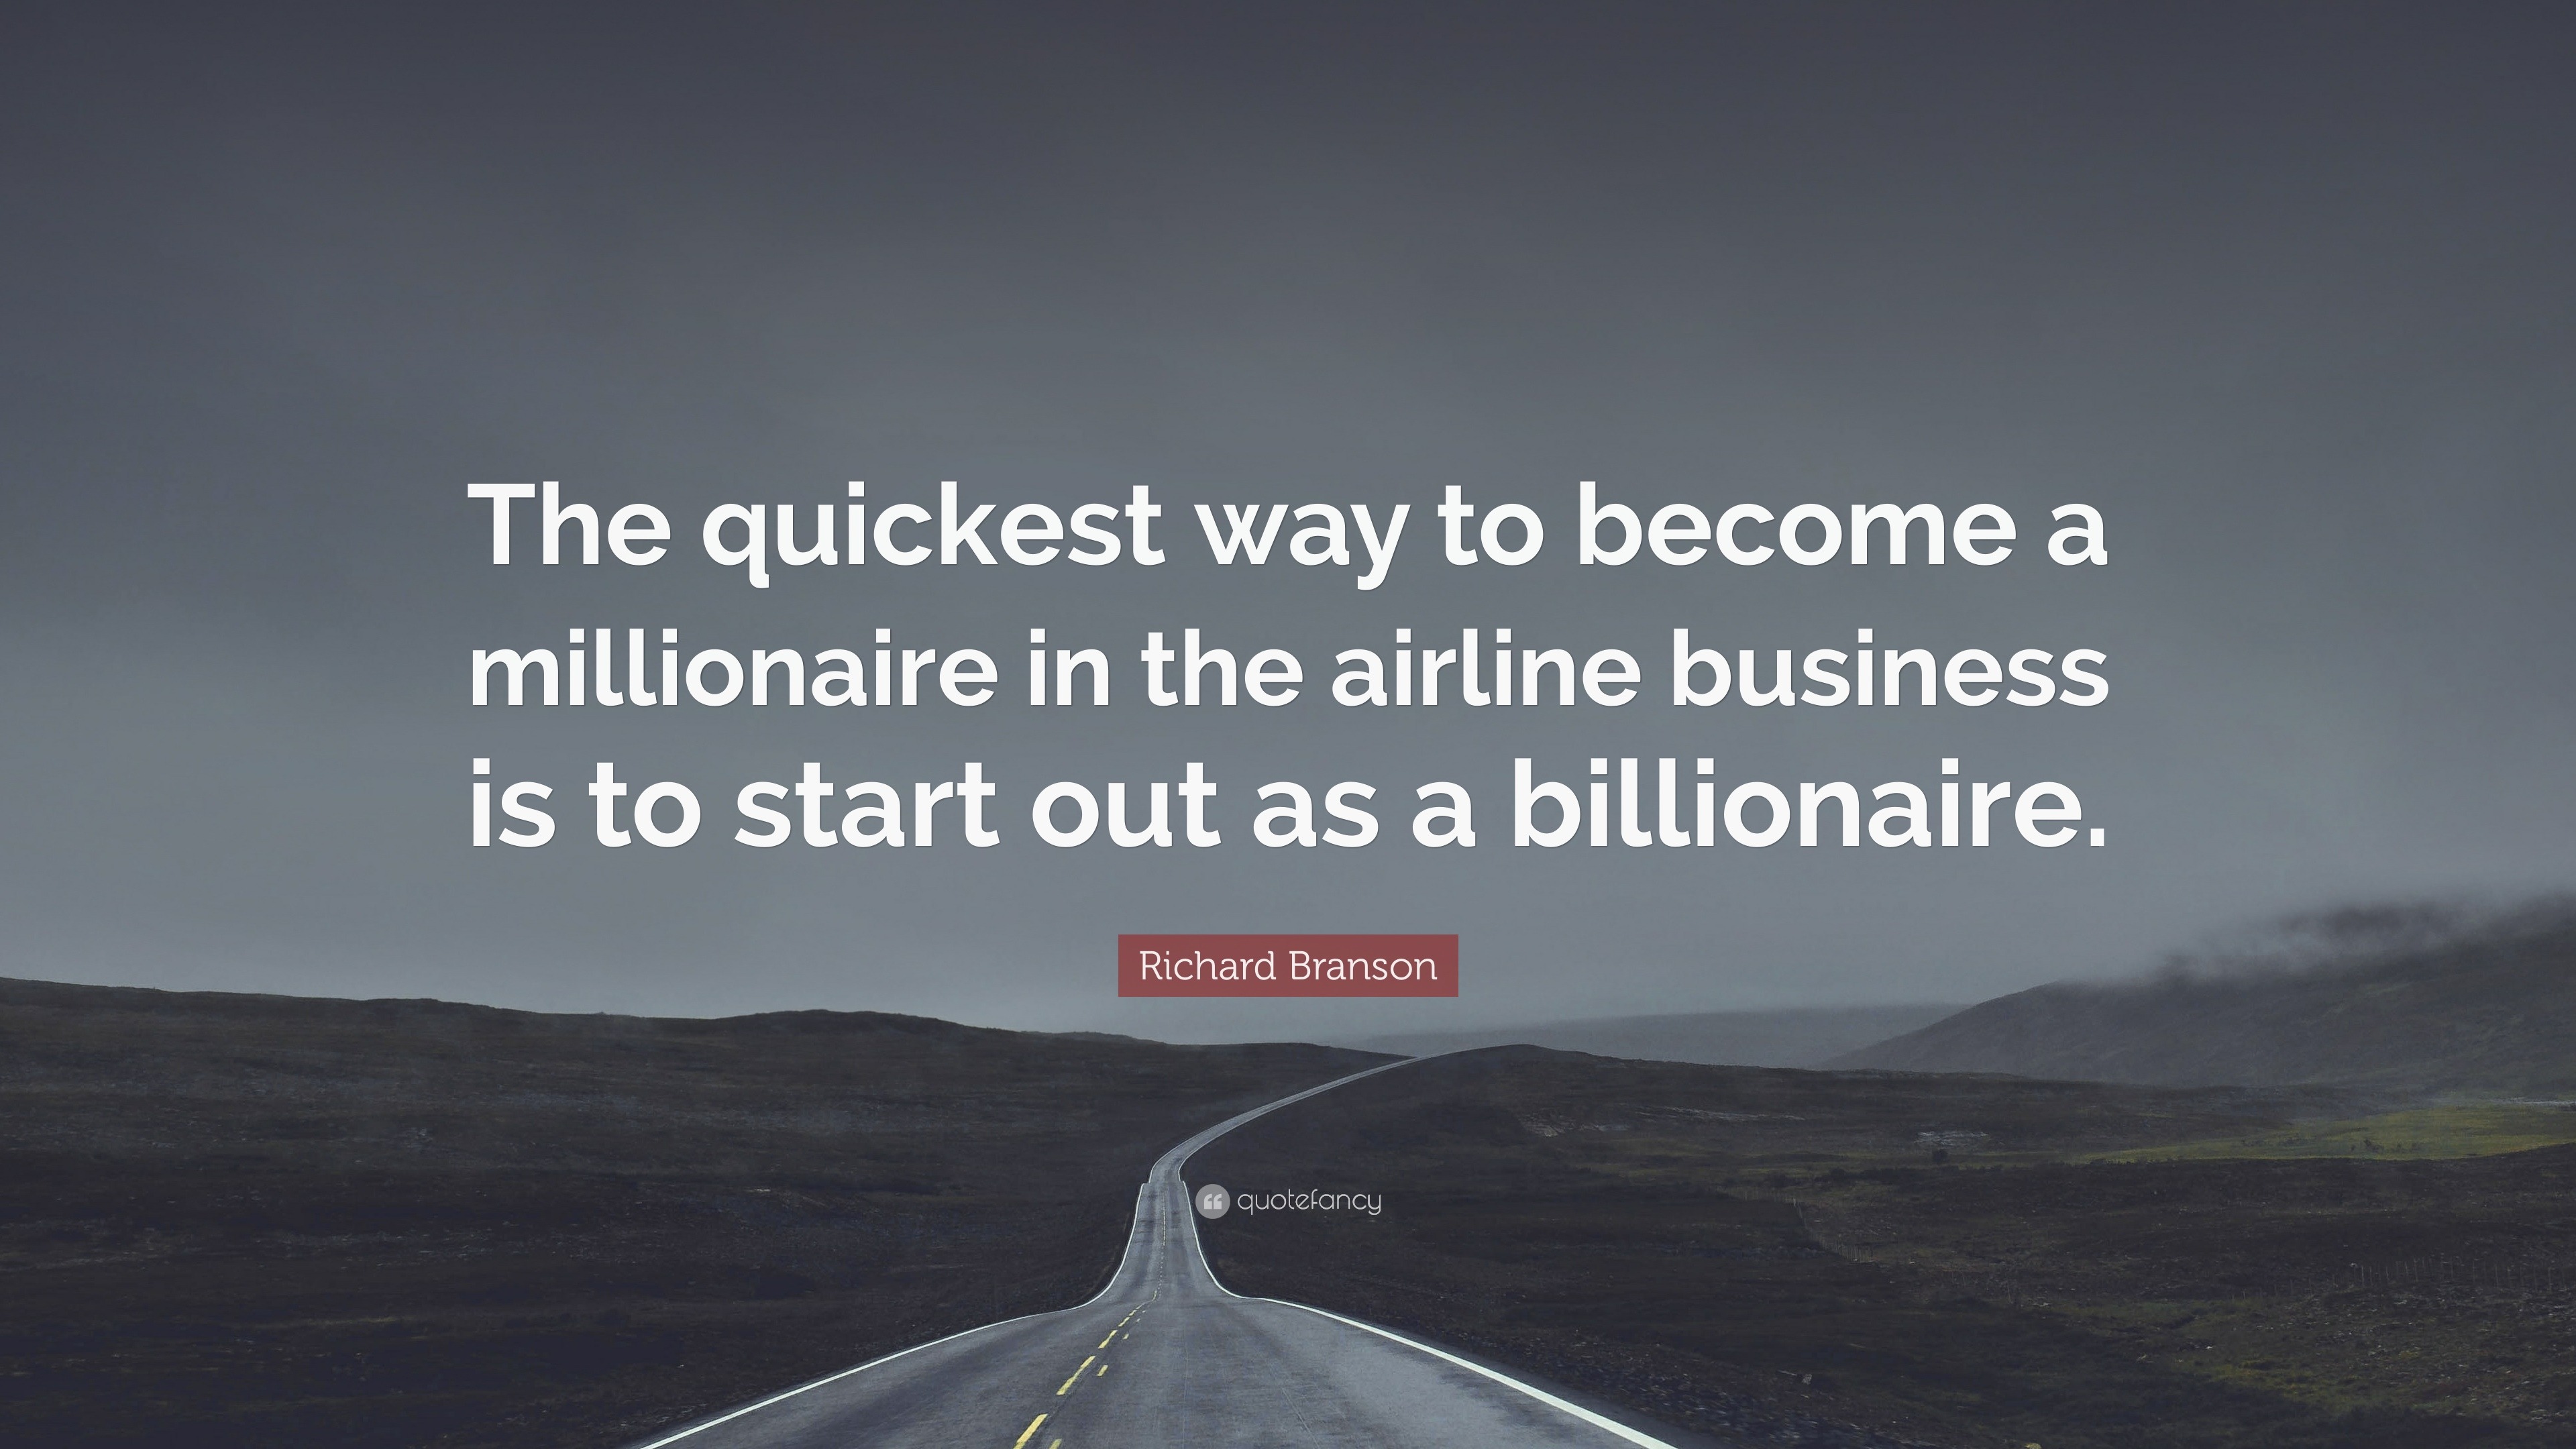 Richard Branson Quote: “The quickest way to become a millionaire